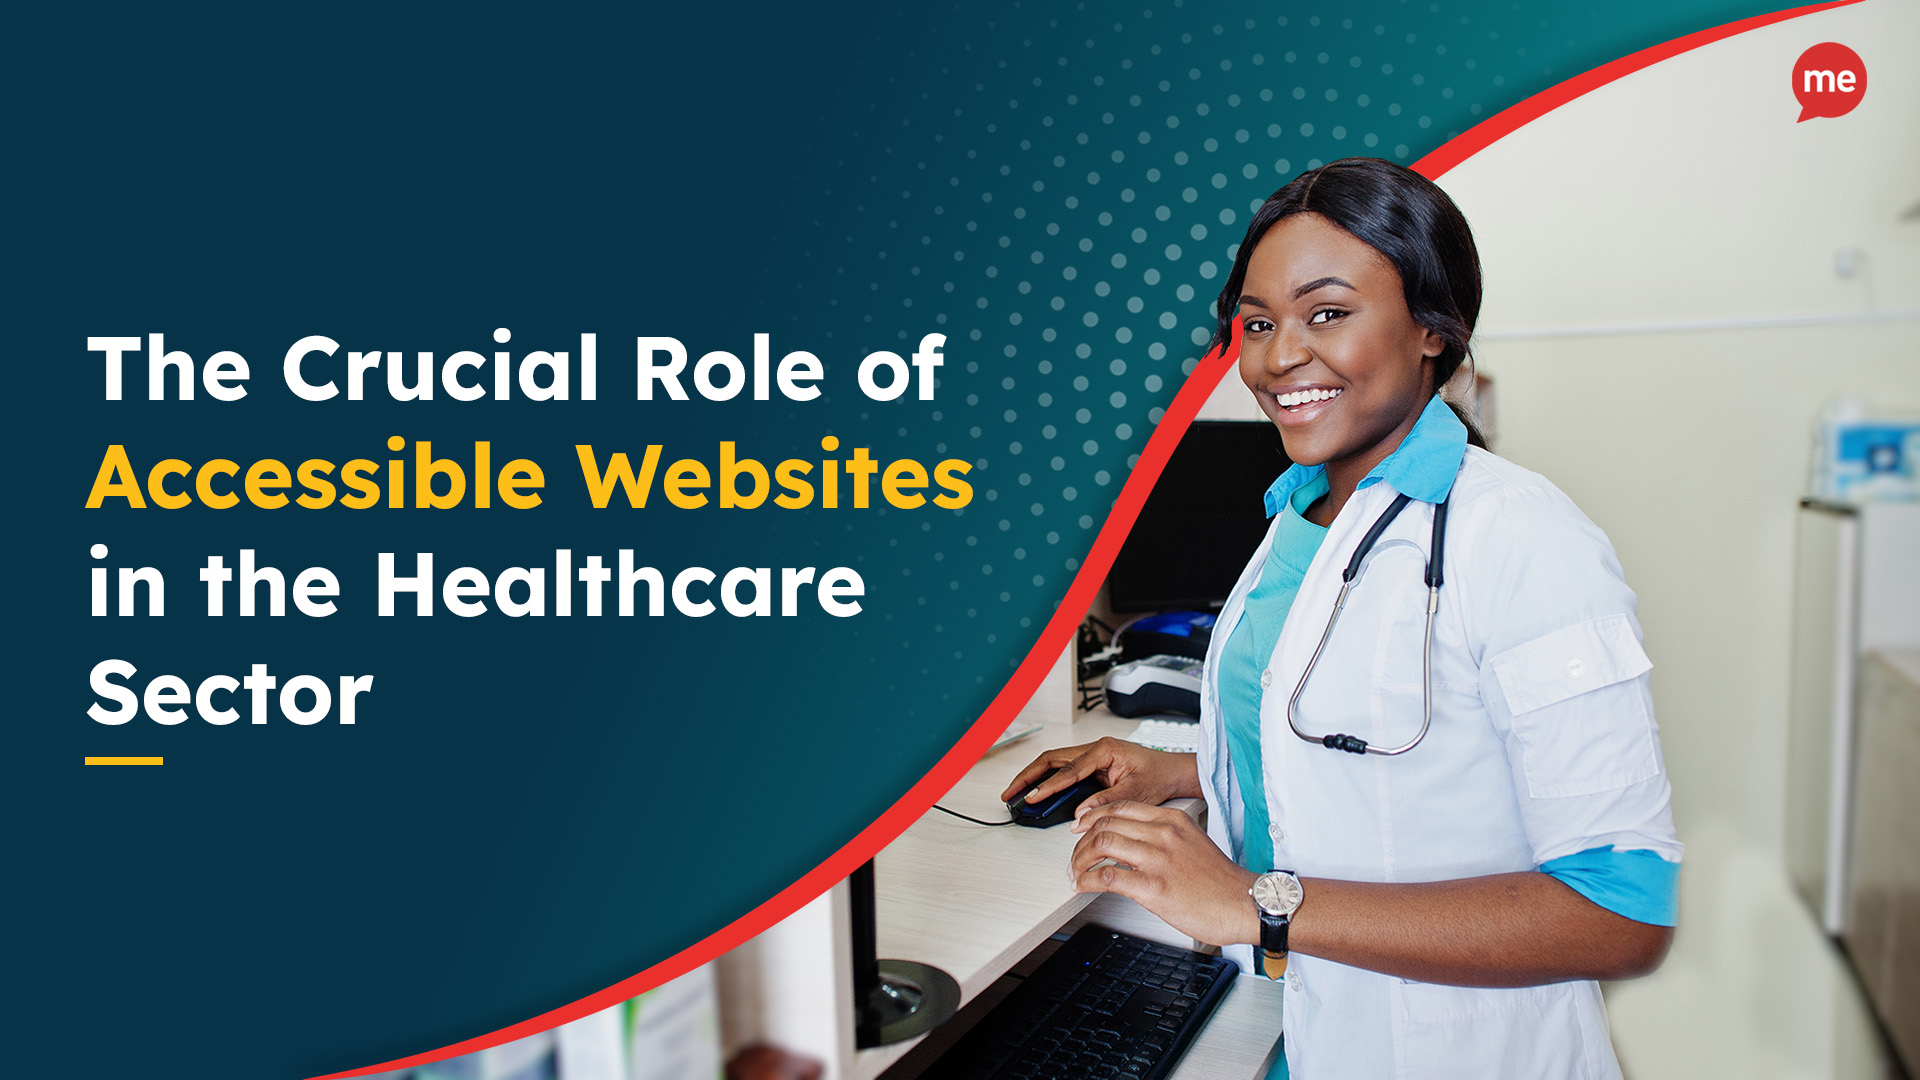 A female pharmacist smiling in front of a computer. Title text reads "The Crucial Role of Accessible Websites in the Healthcare Sector